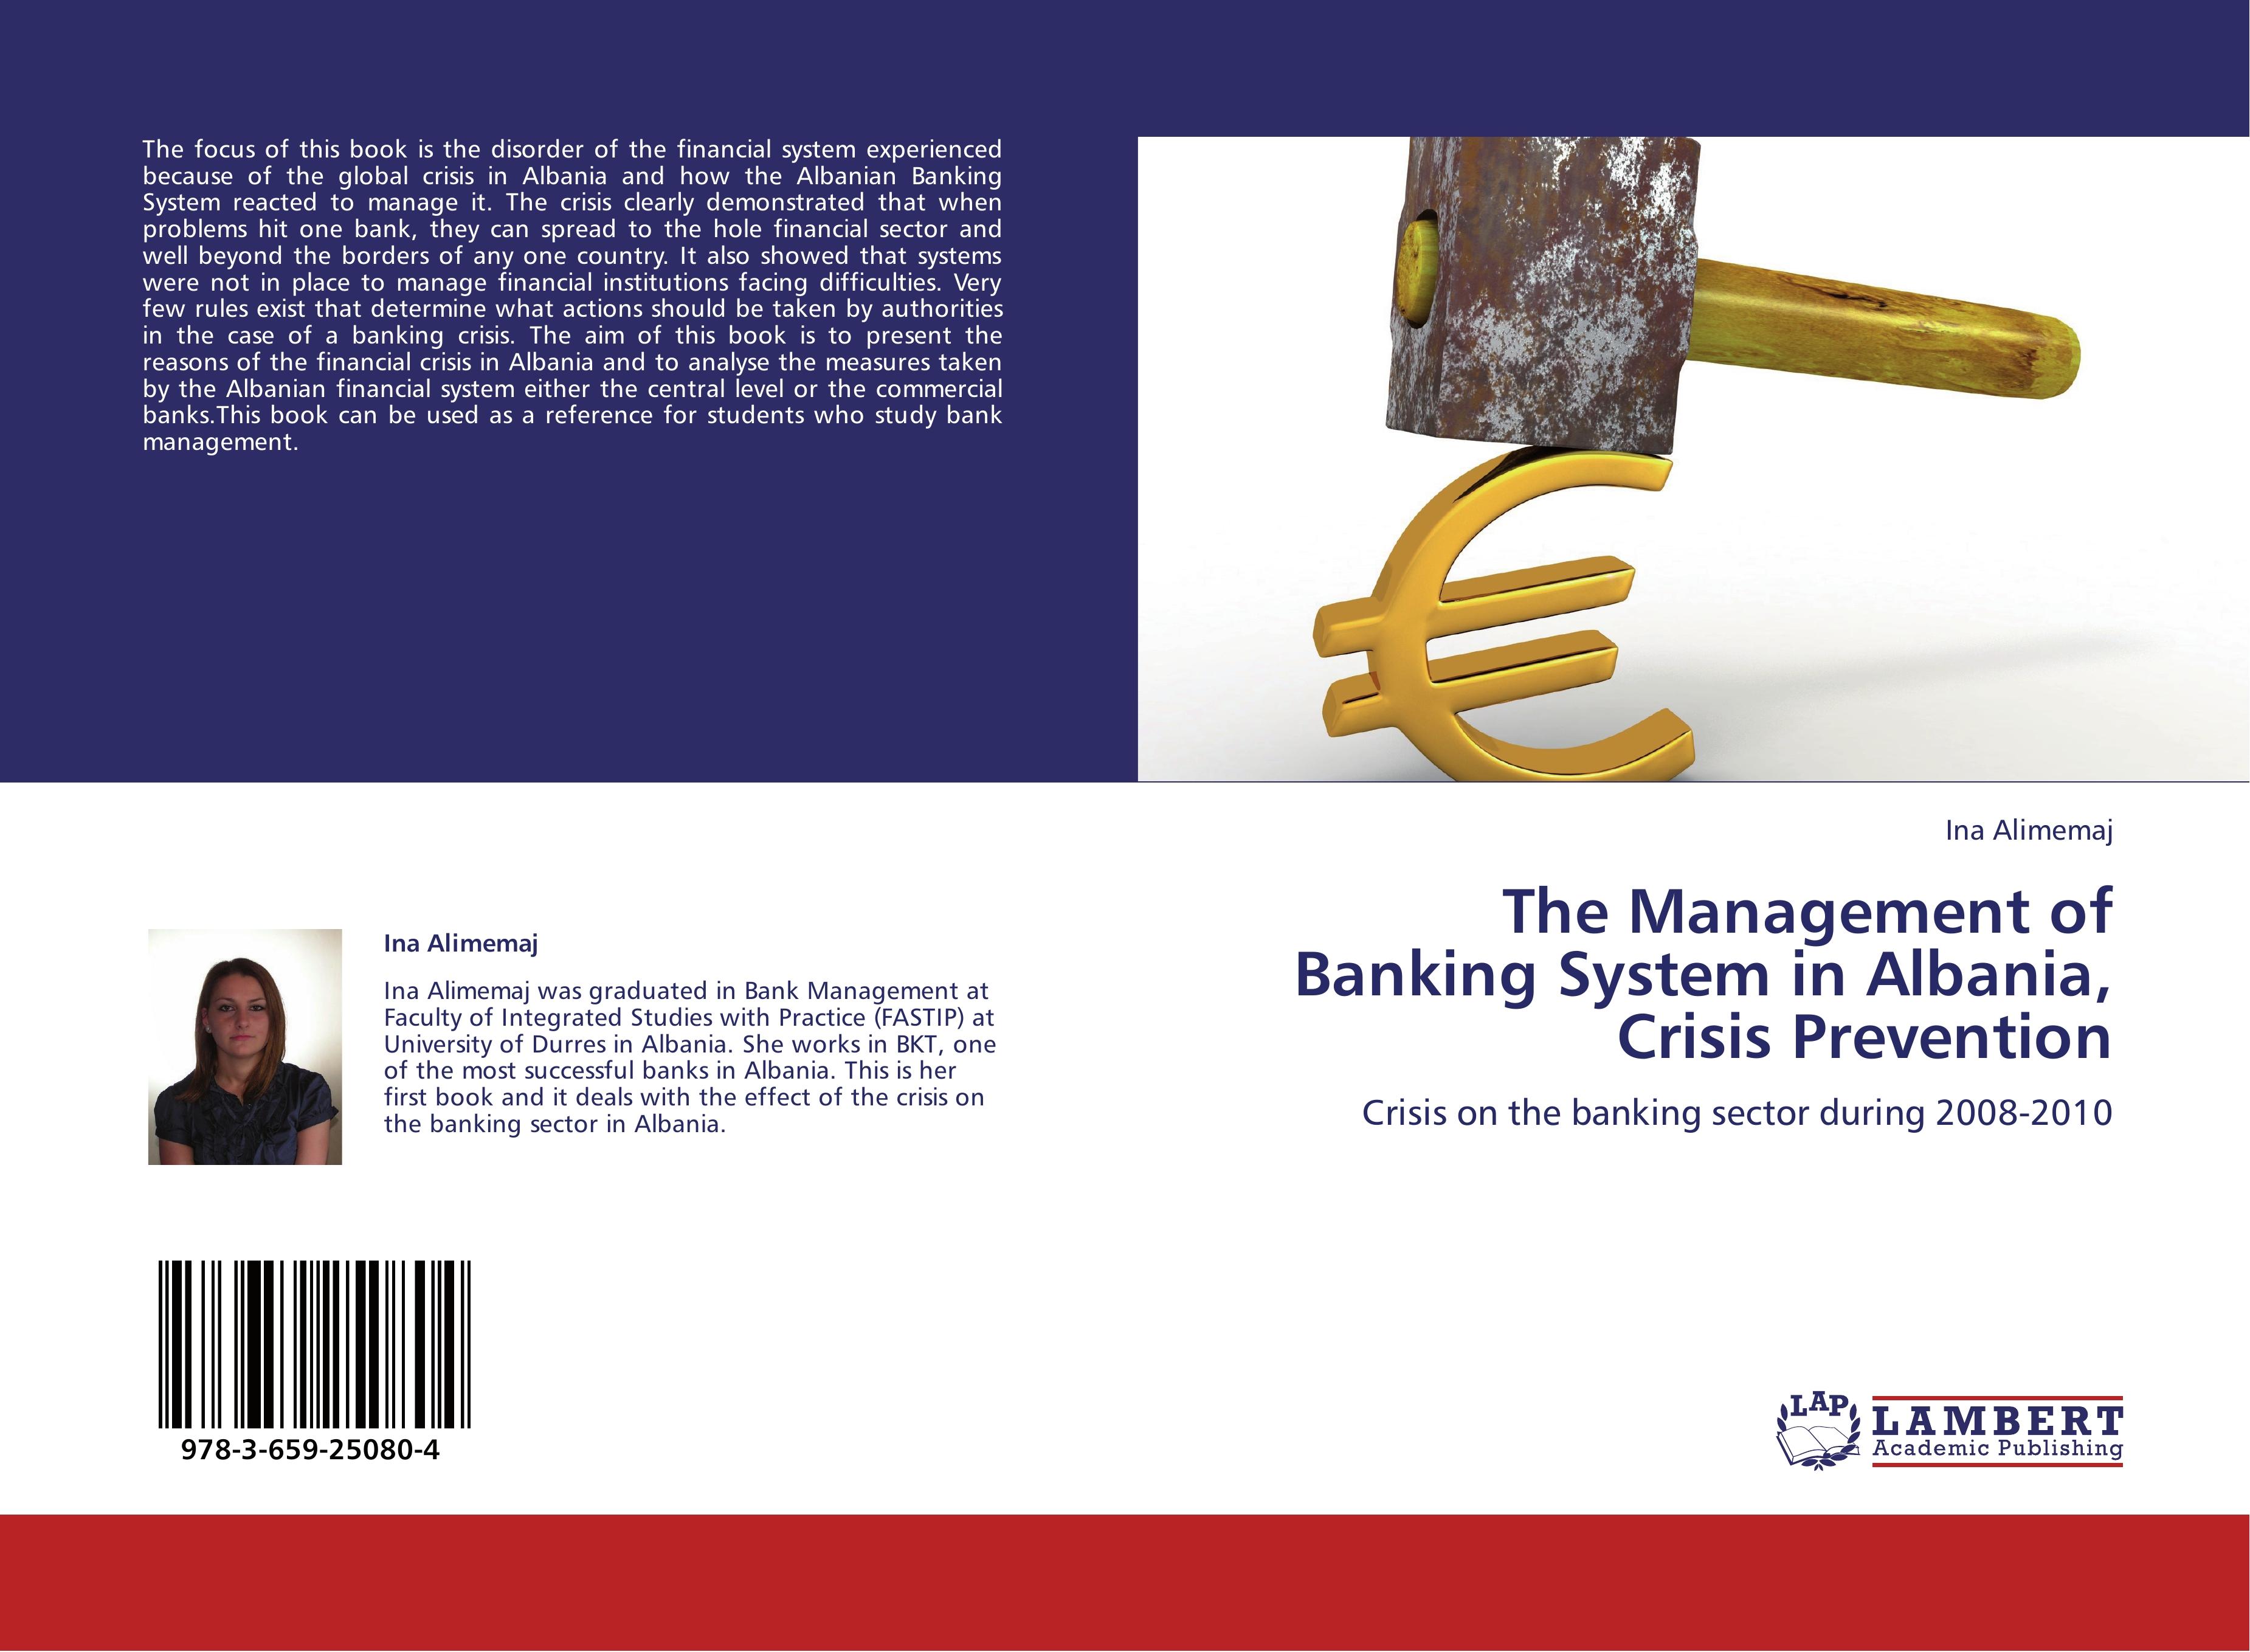 The Management of Banking System in Albania, Crisis Prevention - Alimemaj, Ina